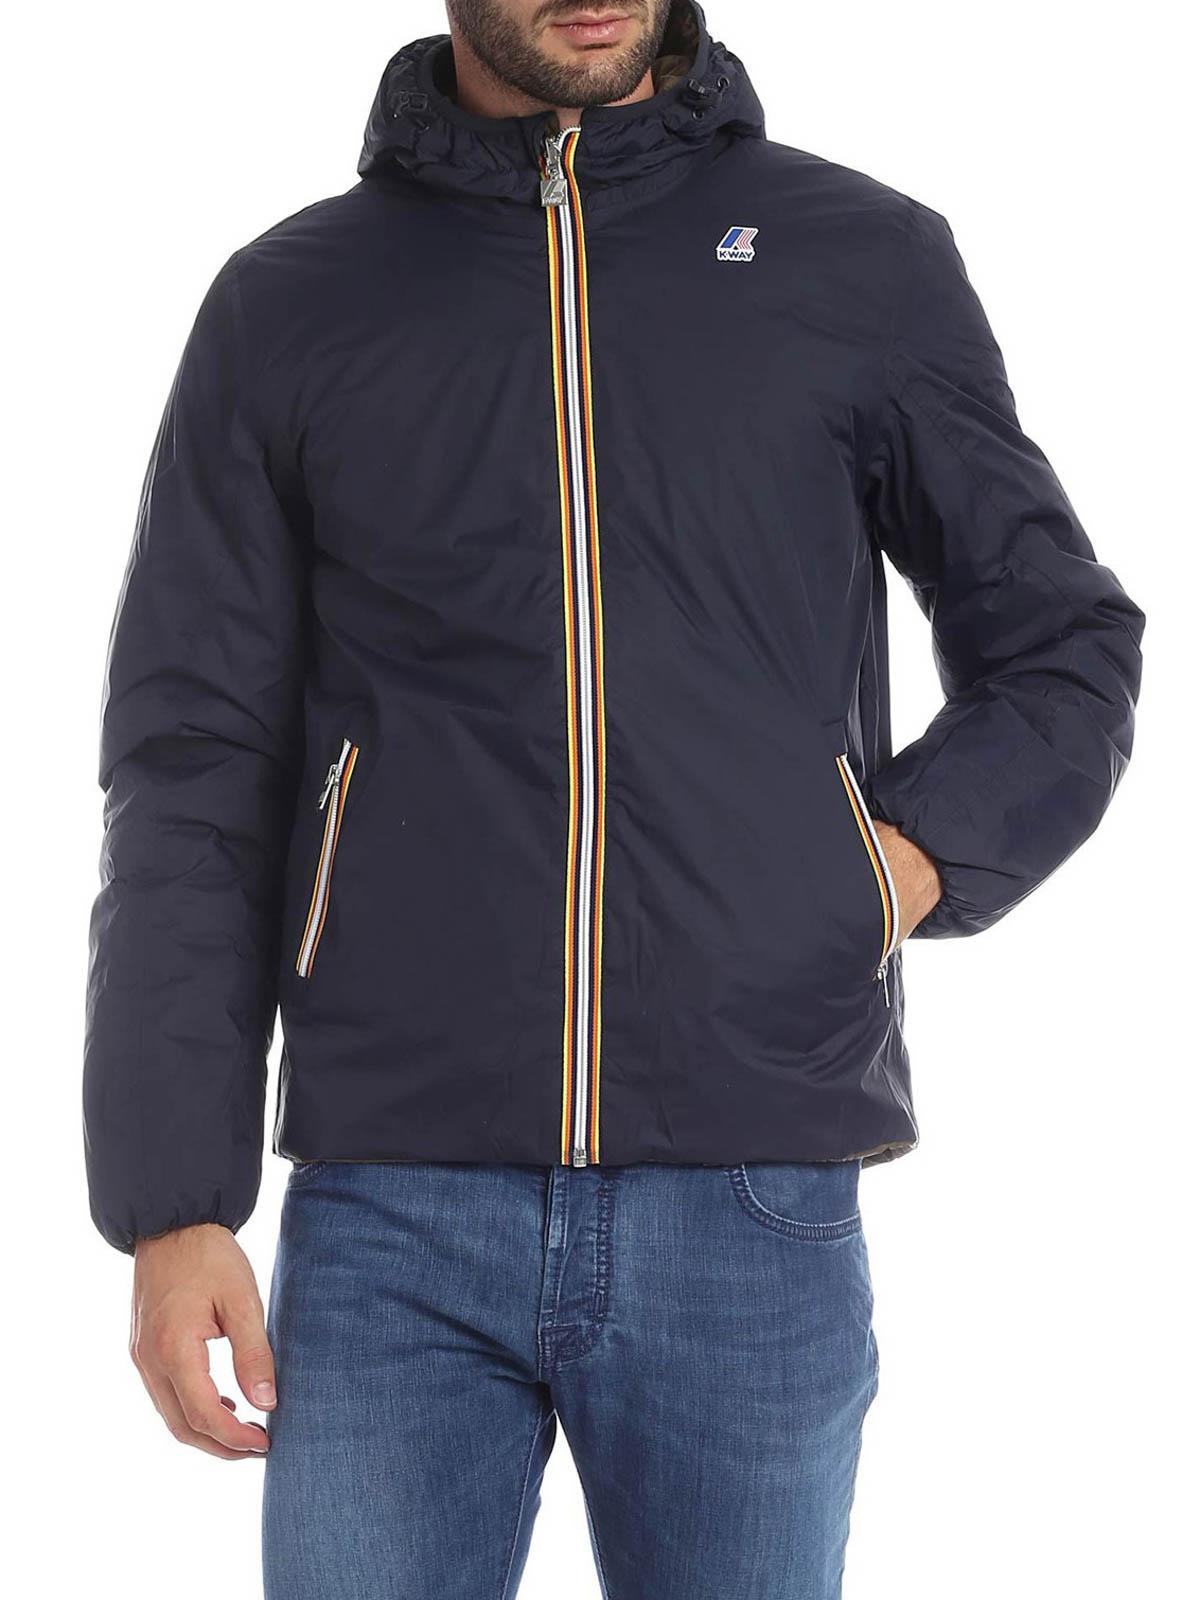 K-Way Synthetic Jacques Thermo Plus Puffer Jacket in Blue for Men - Lyst